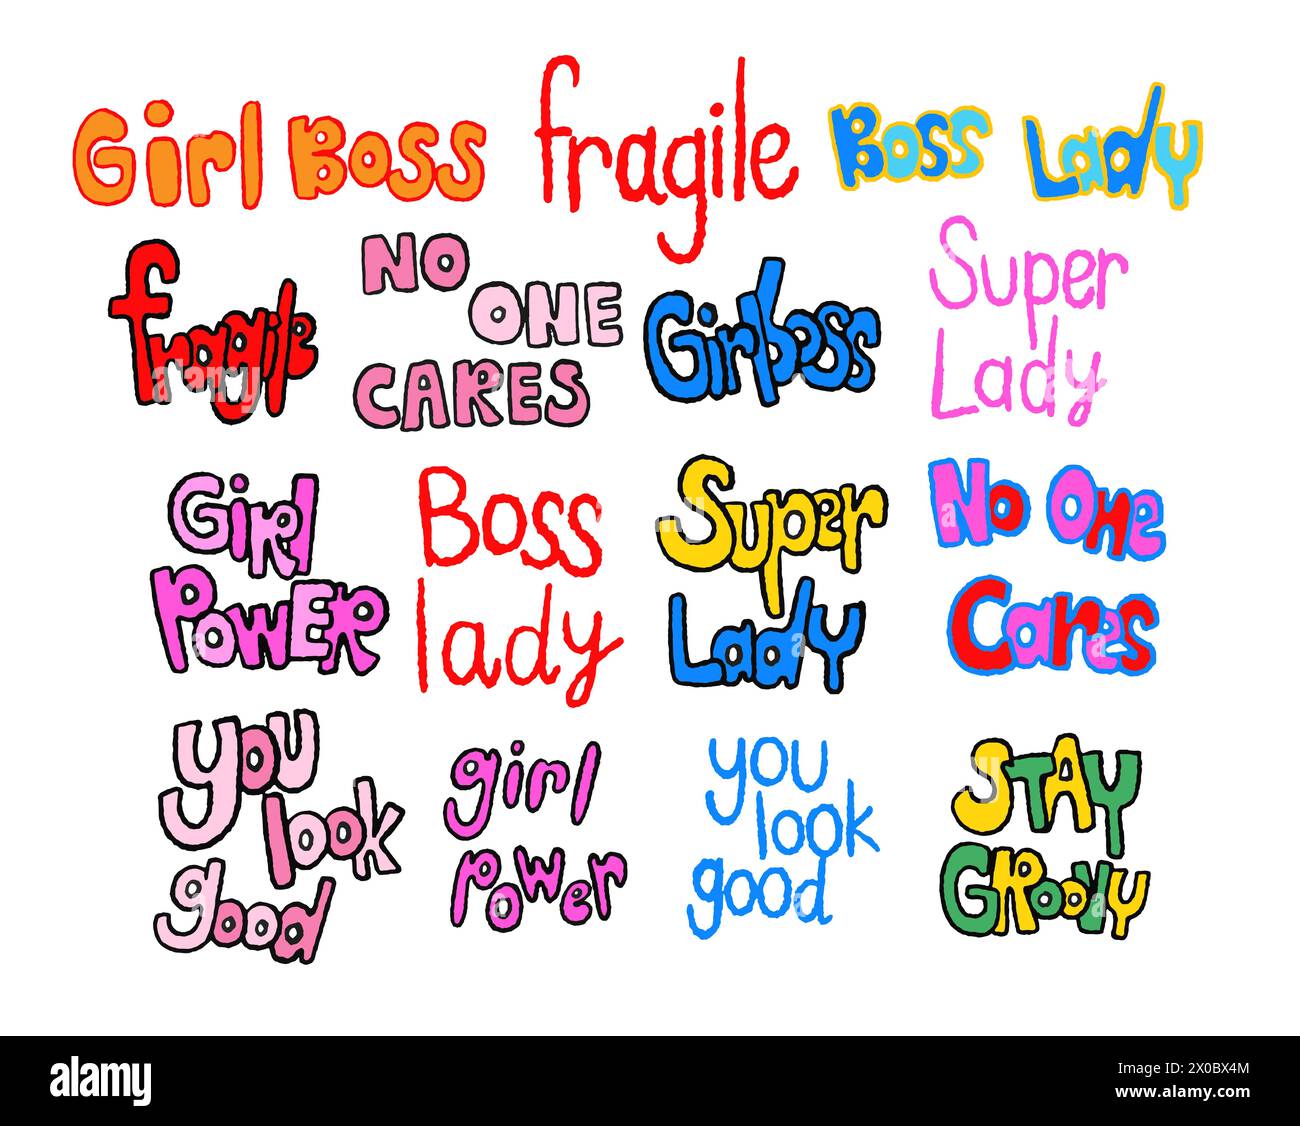 Hand drawn empowering words such as girl boss, super lady, stay groovy, girl power, fragile, no one cares, boss lady for feminist, stickers, icons Stock Vector